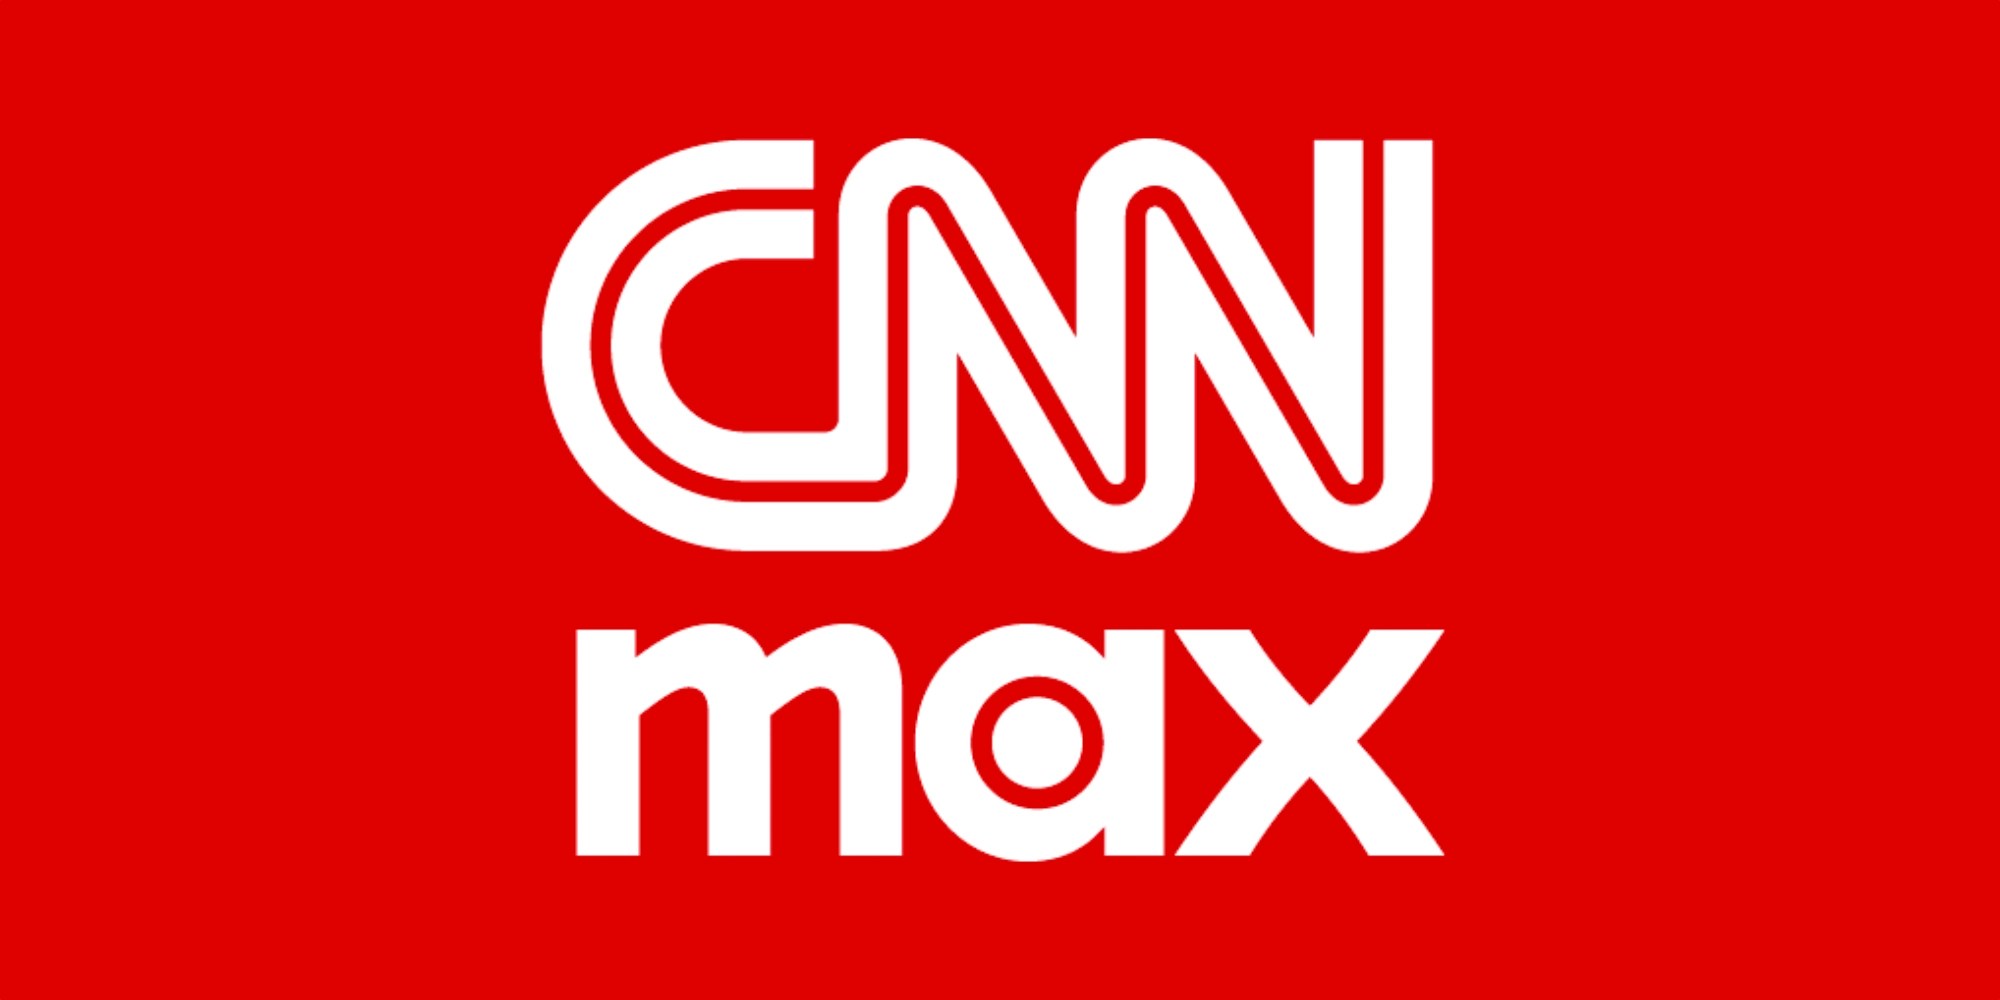 CNN on HBO Max - Is This The New Dawn For Live Channels on OTT?